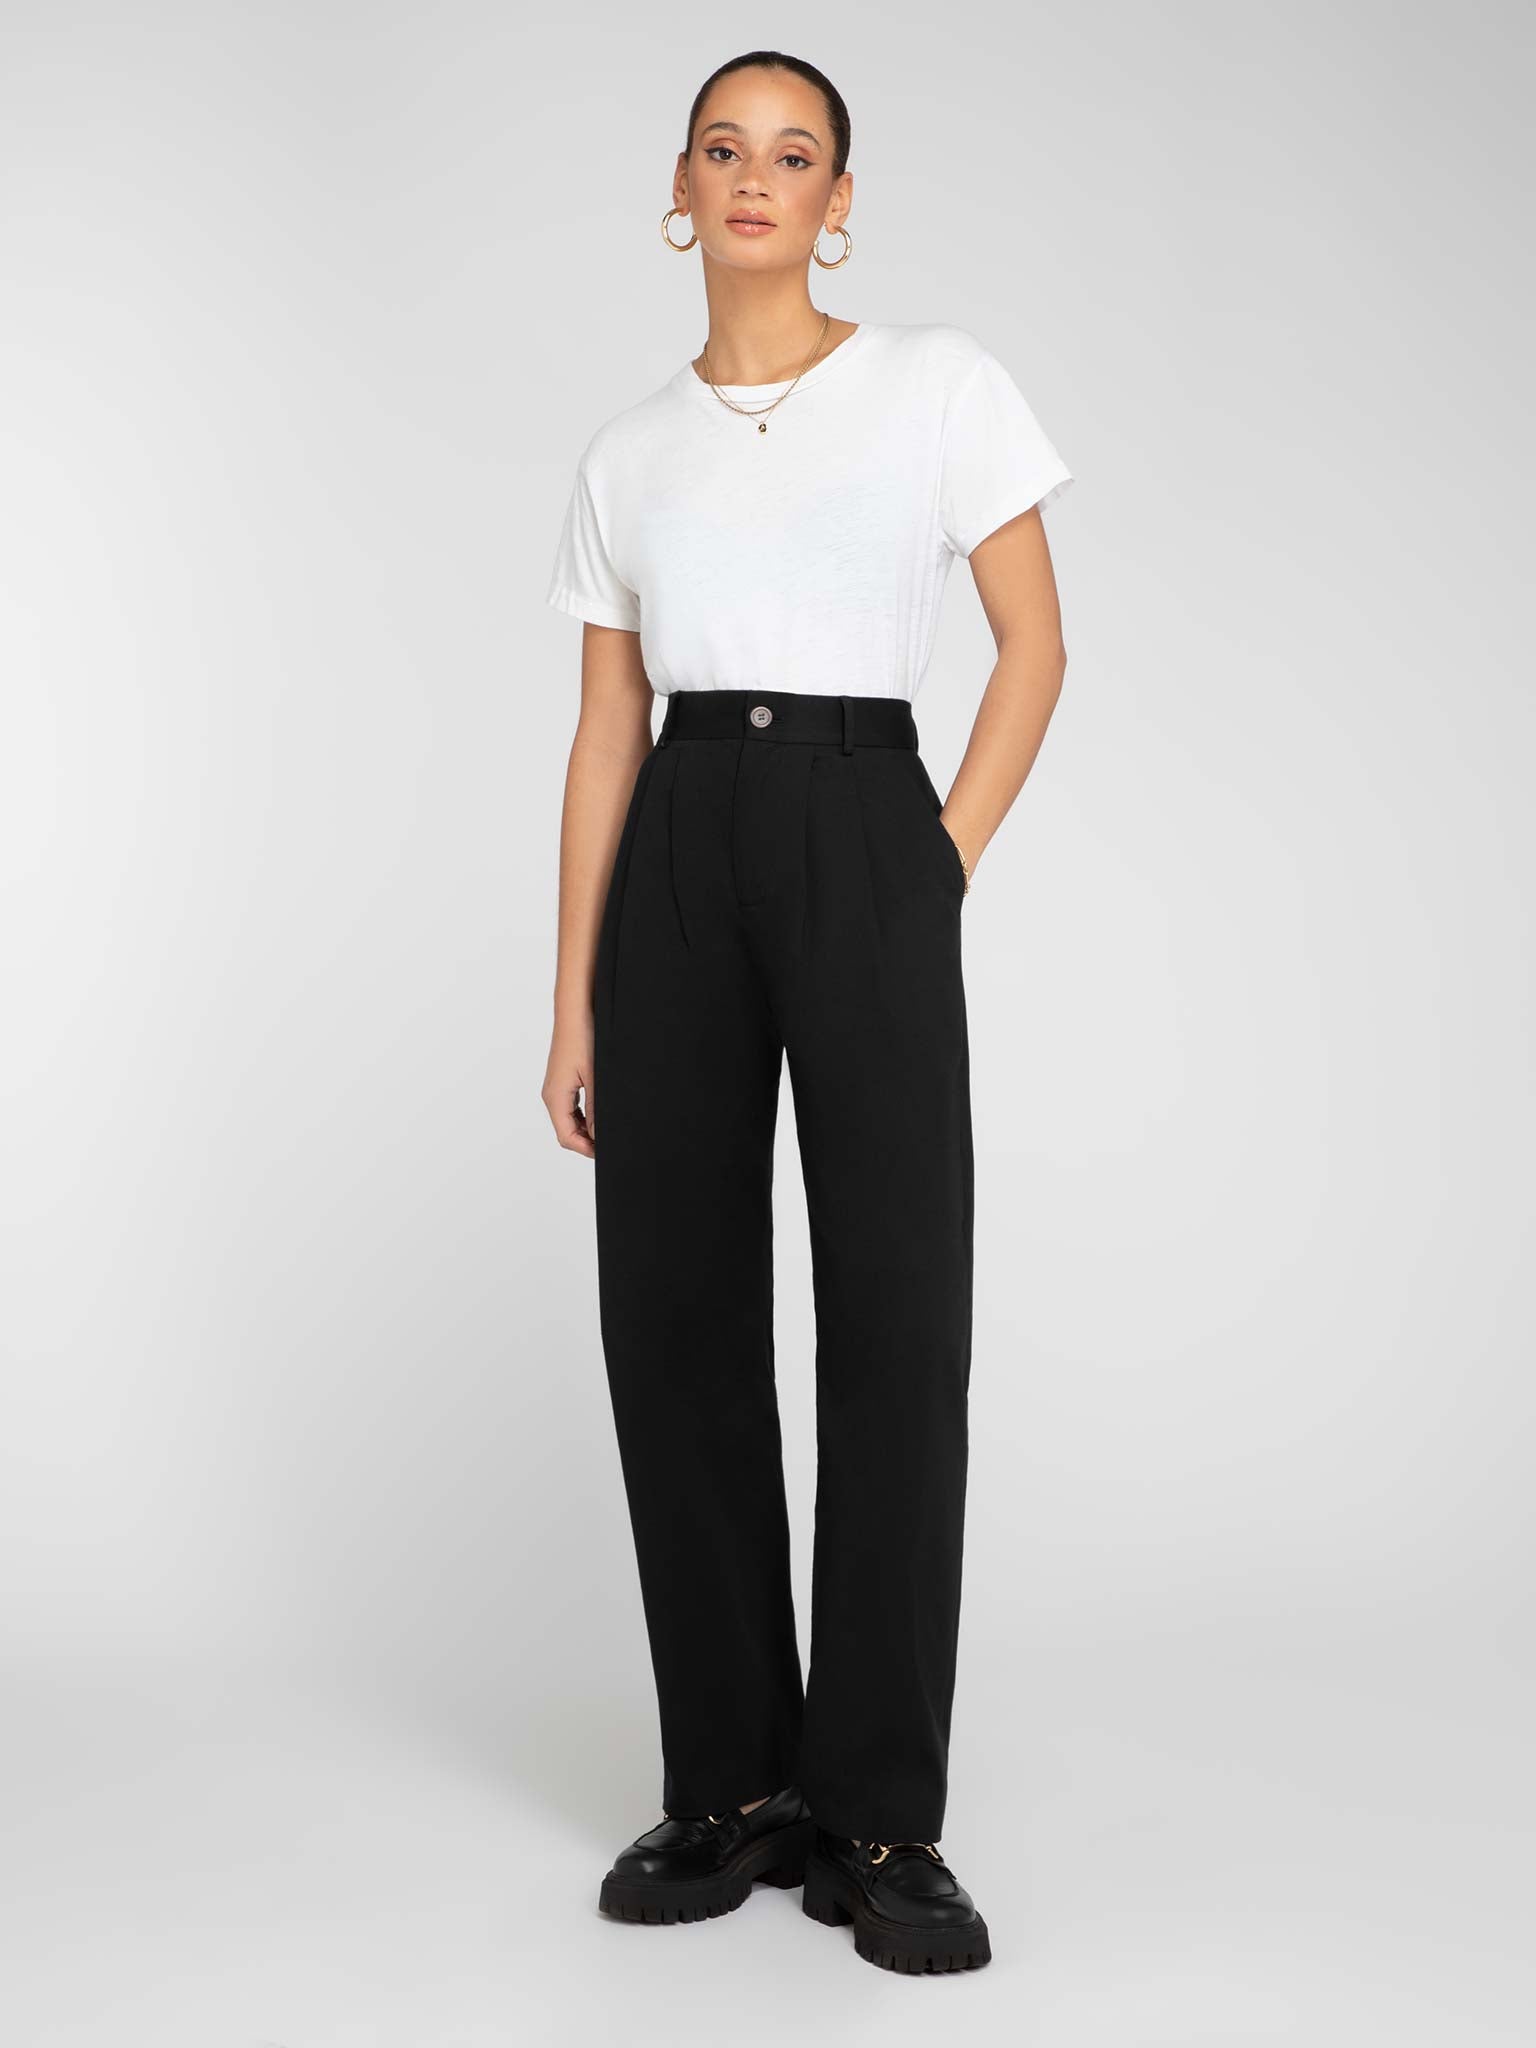 Cinnamon Relaxed Trousers in Black Linen